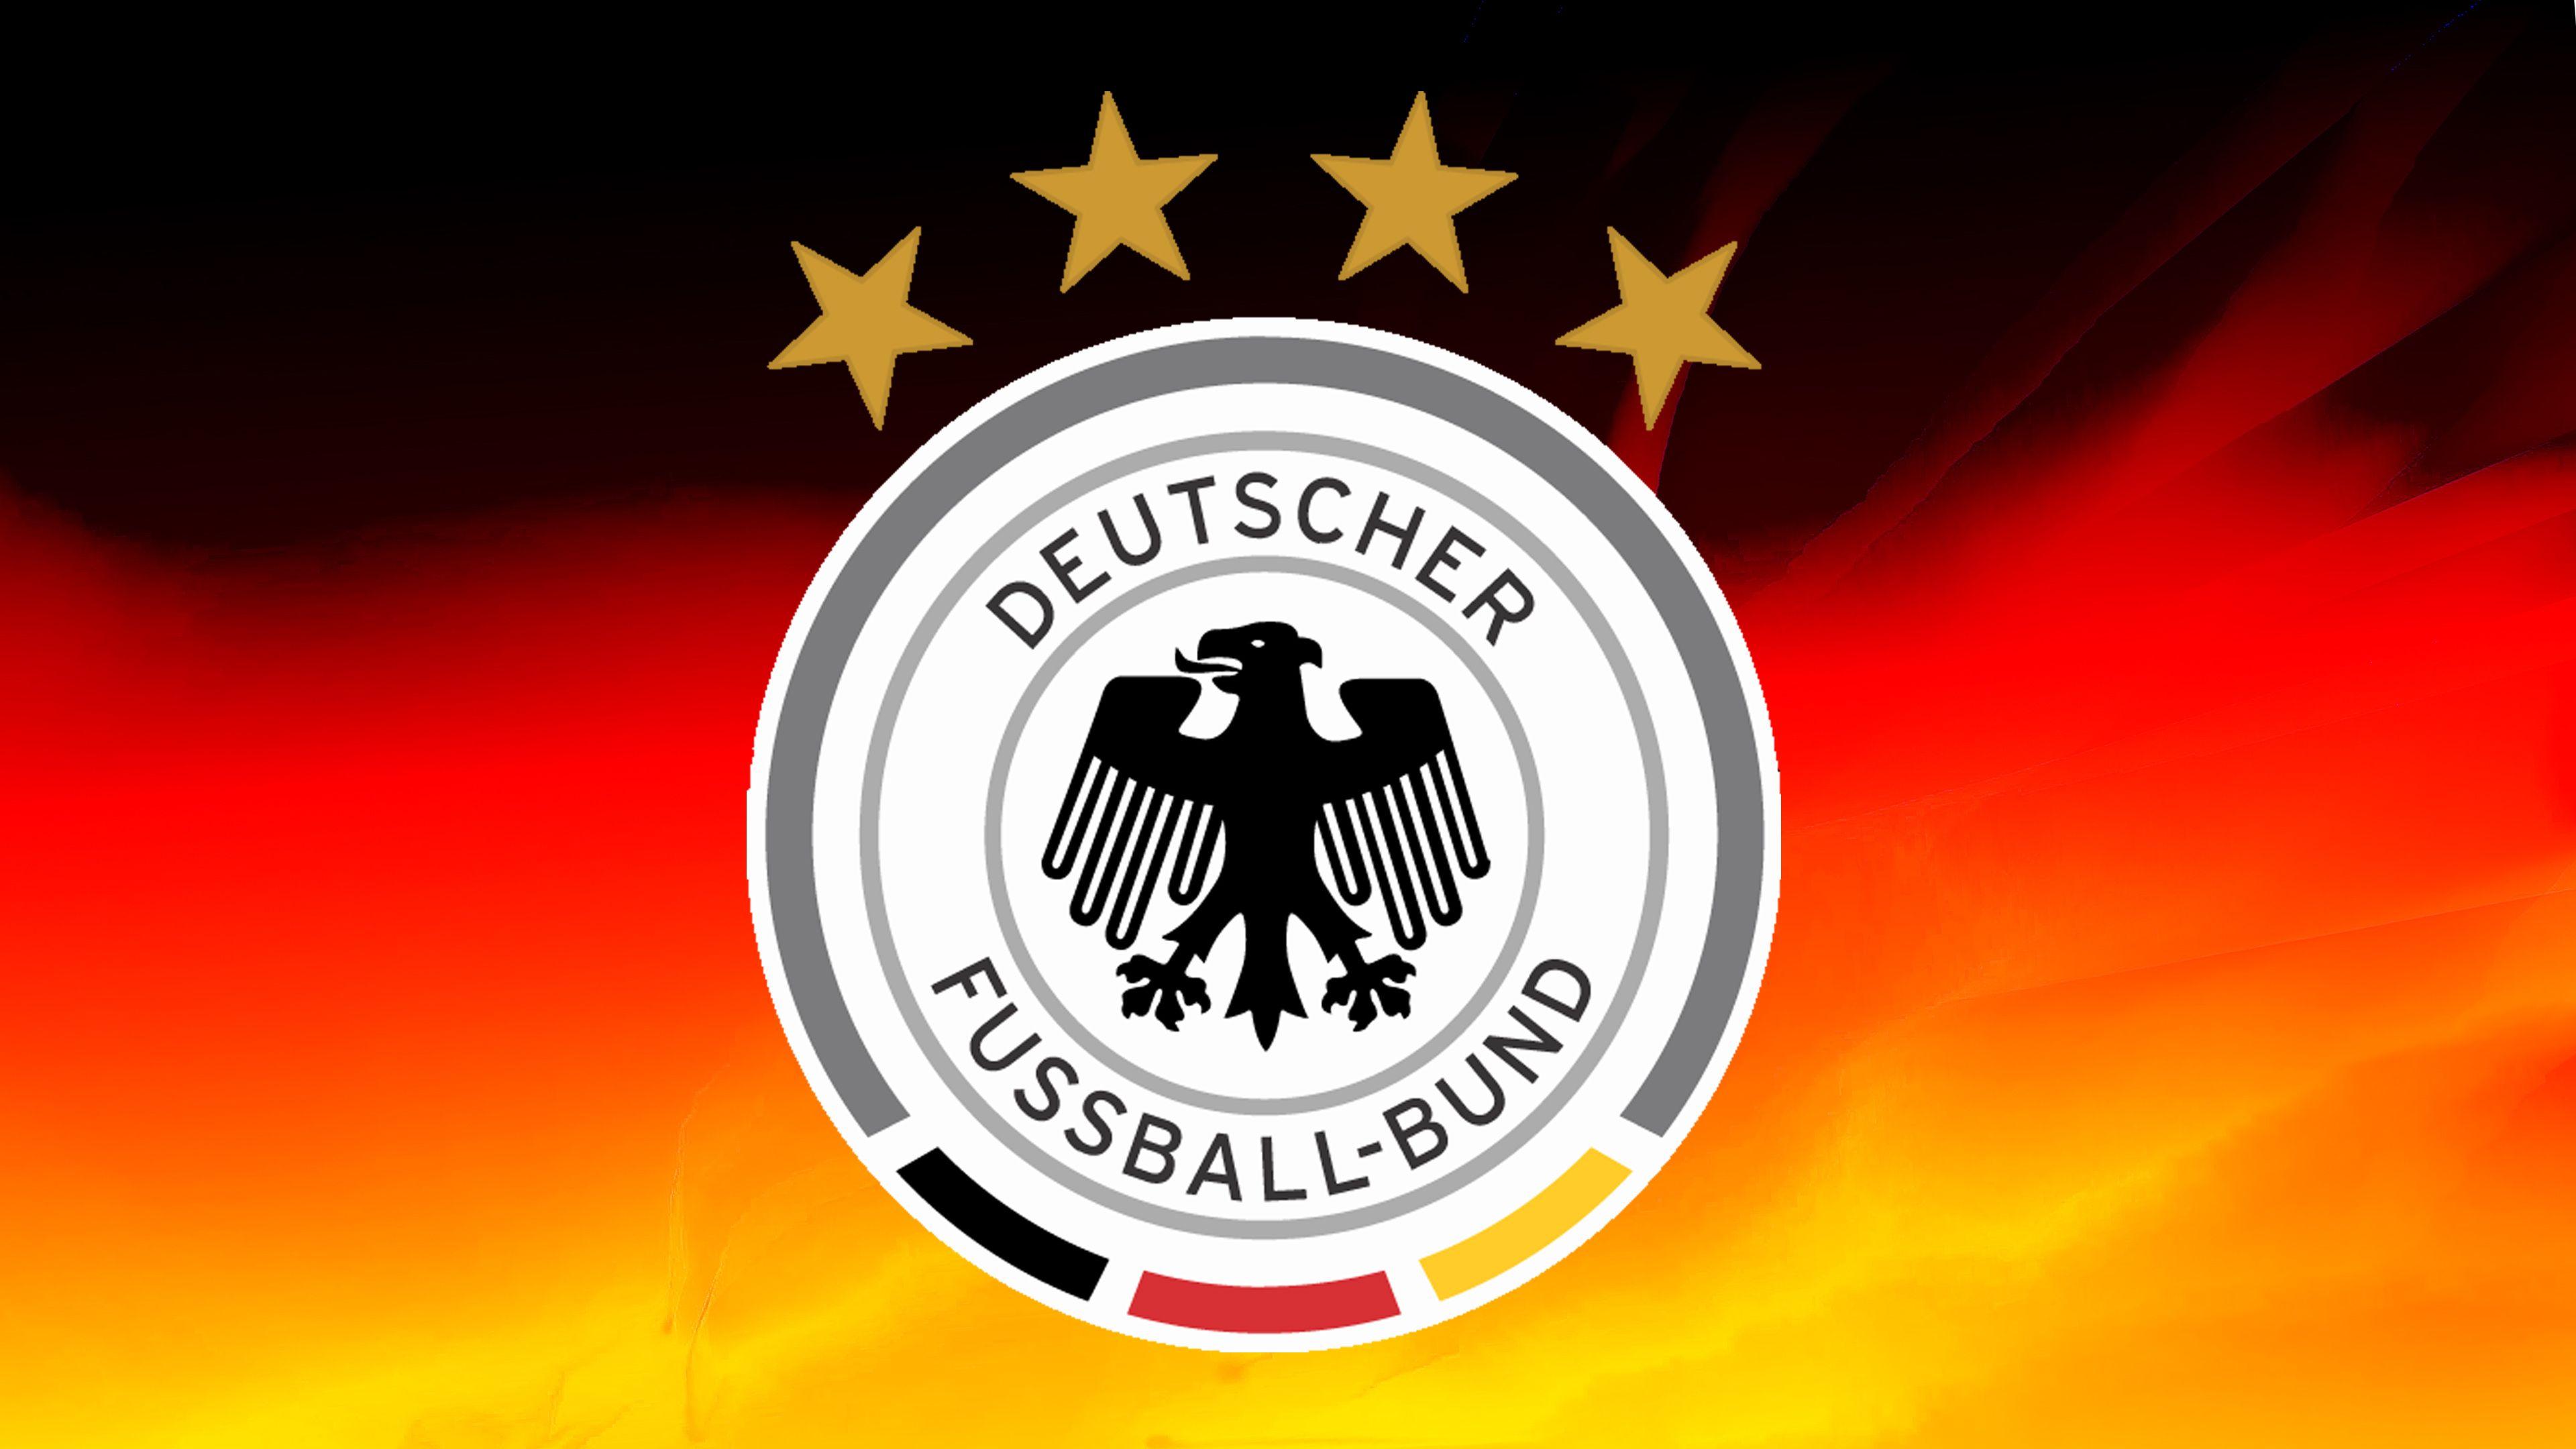 Germany Football Logo Wallpaper with 4 Stars and National Flag. HD